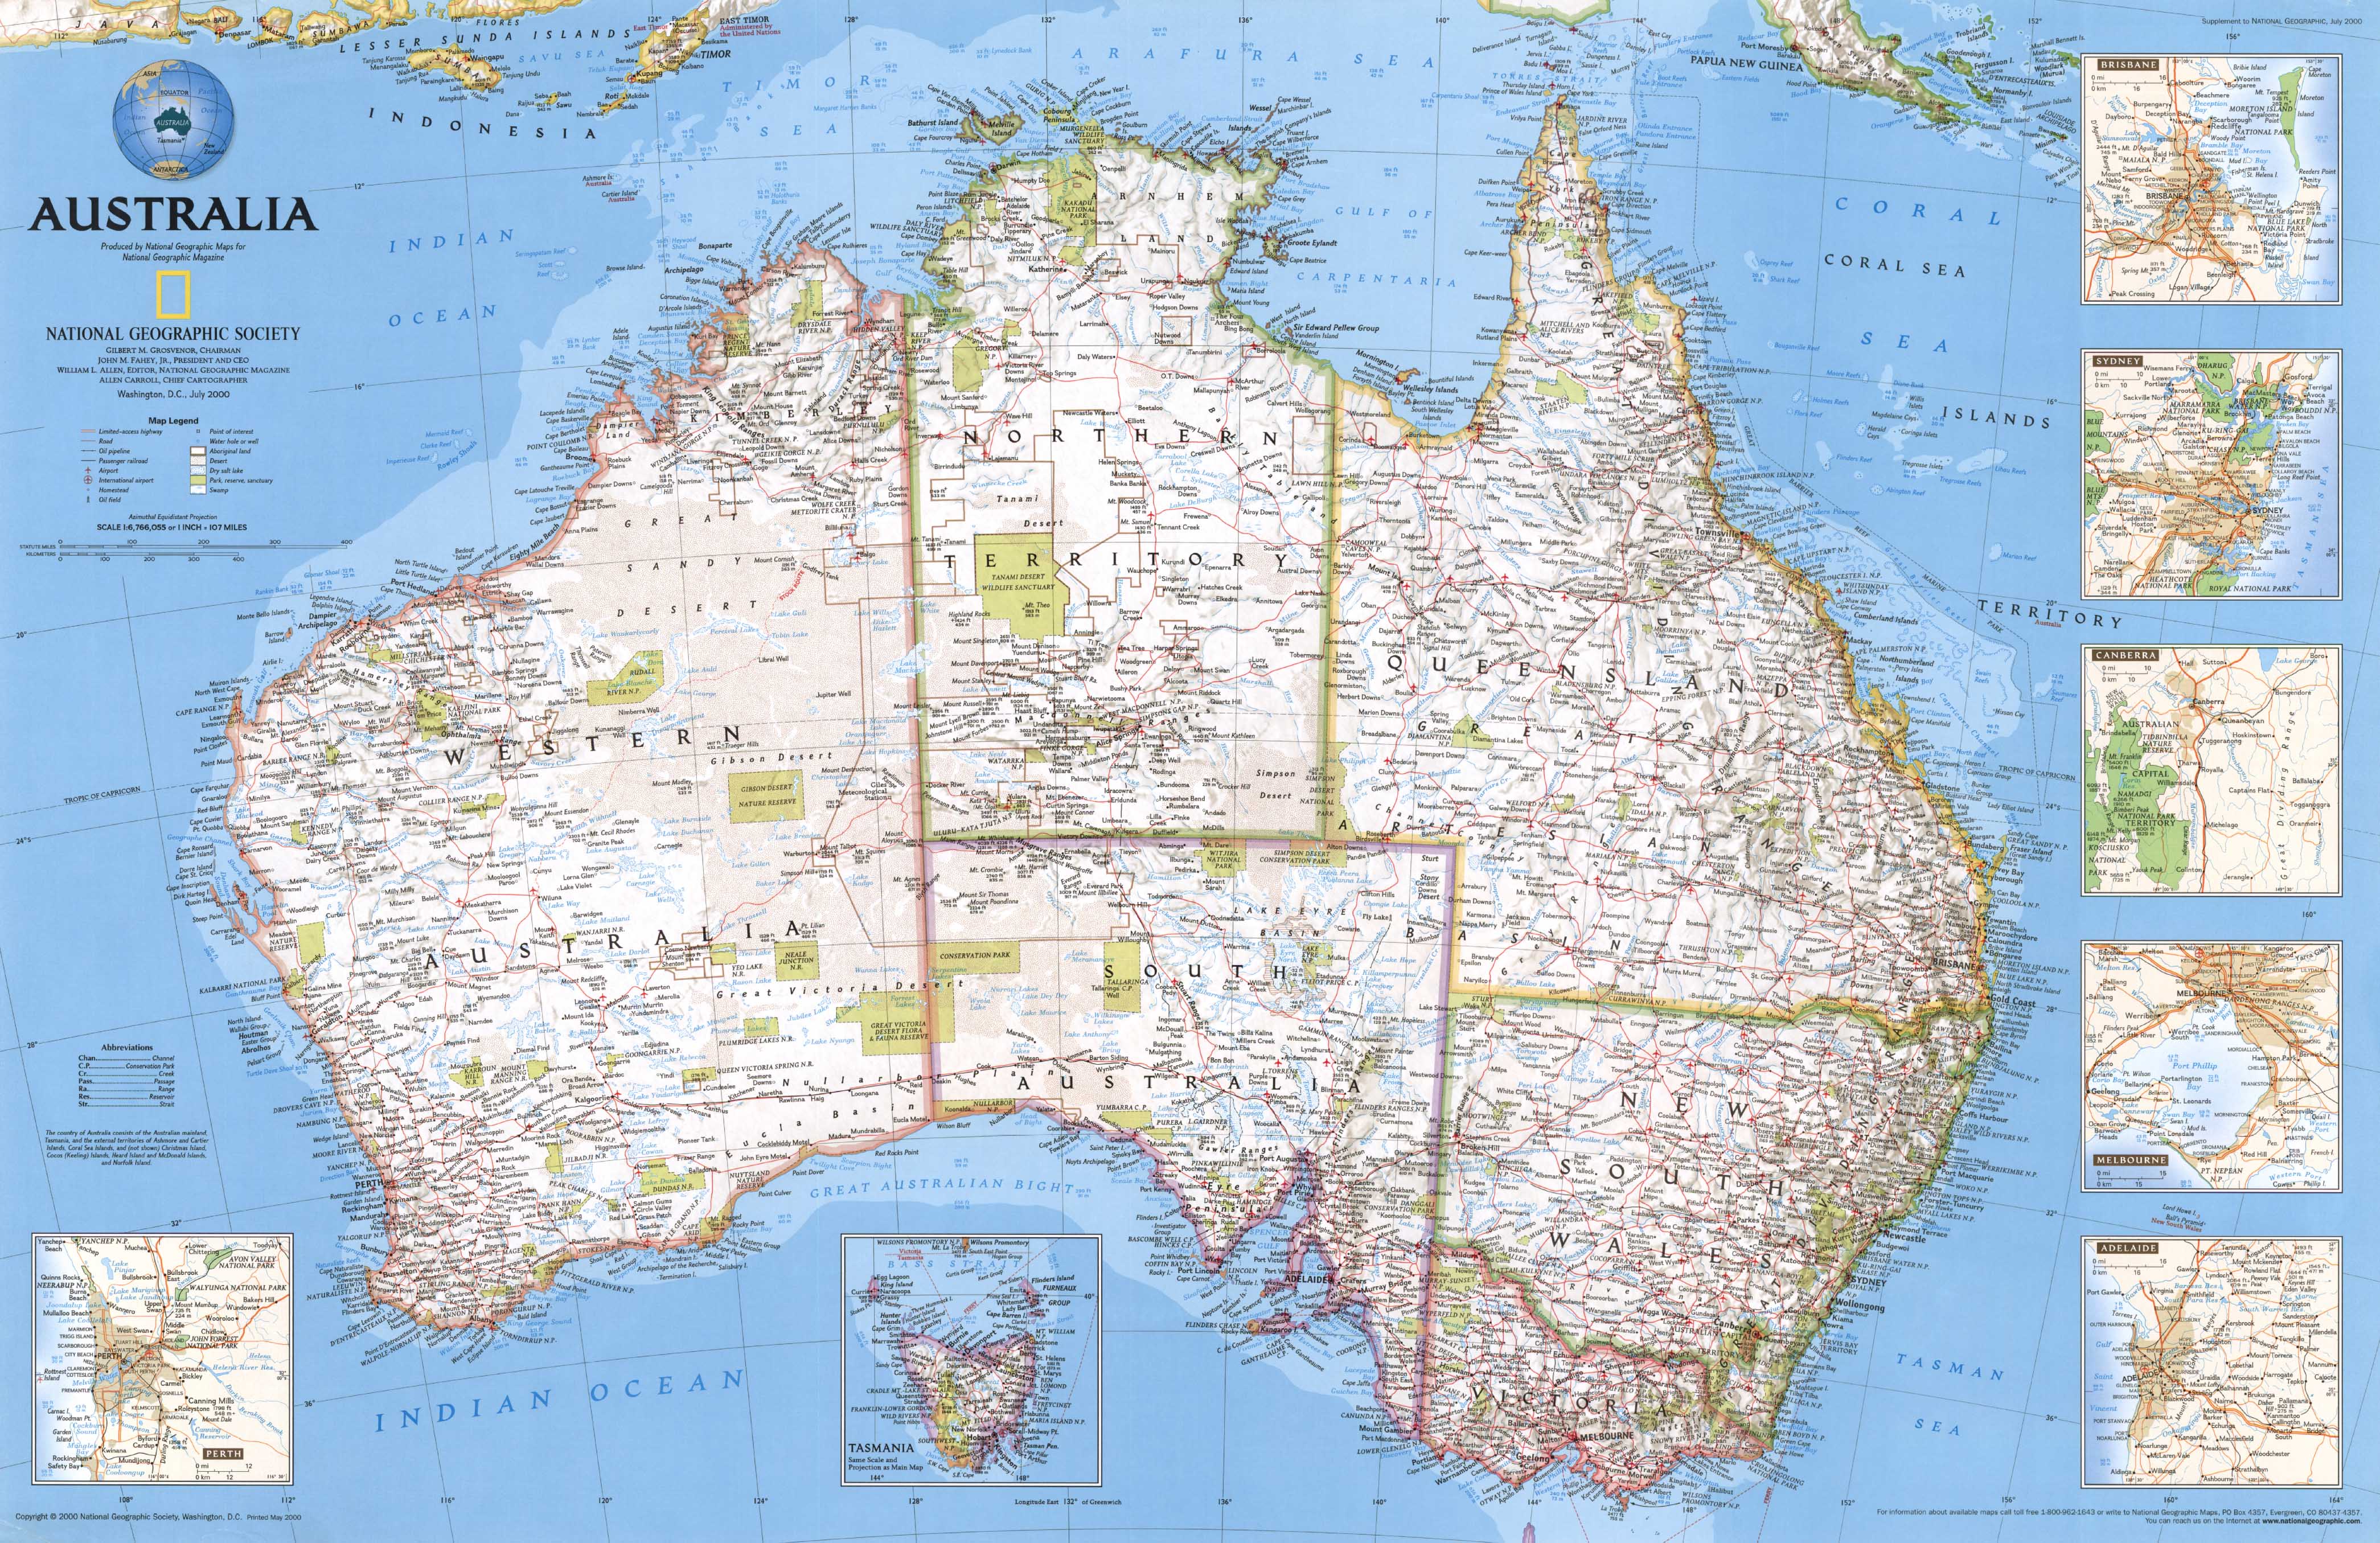 Australia 2000 Map by National Geographic | Shop Mapworld